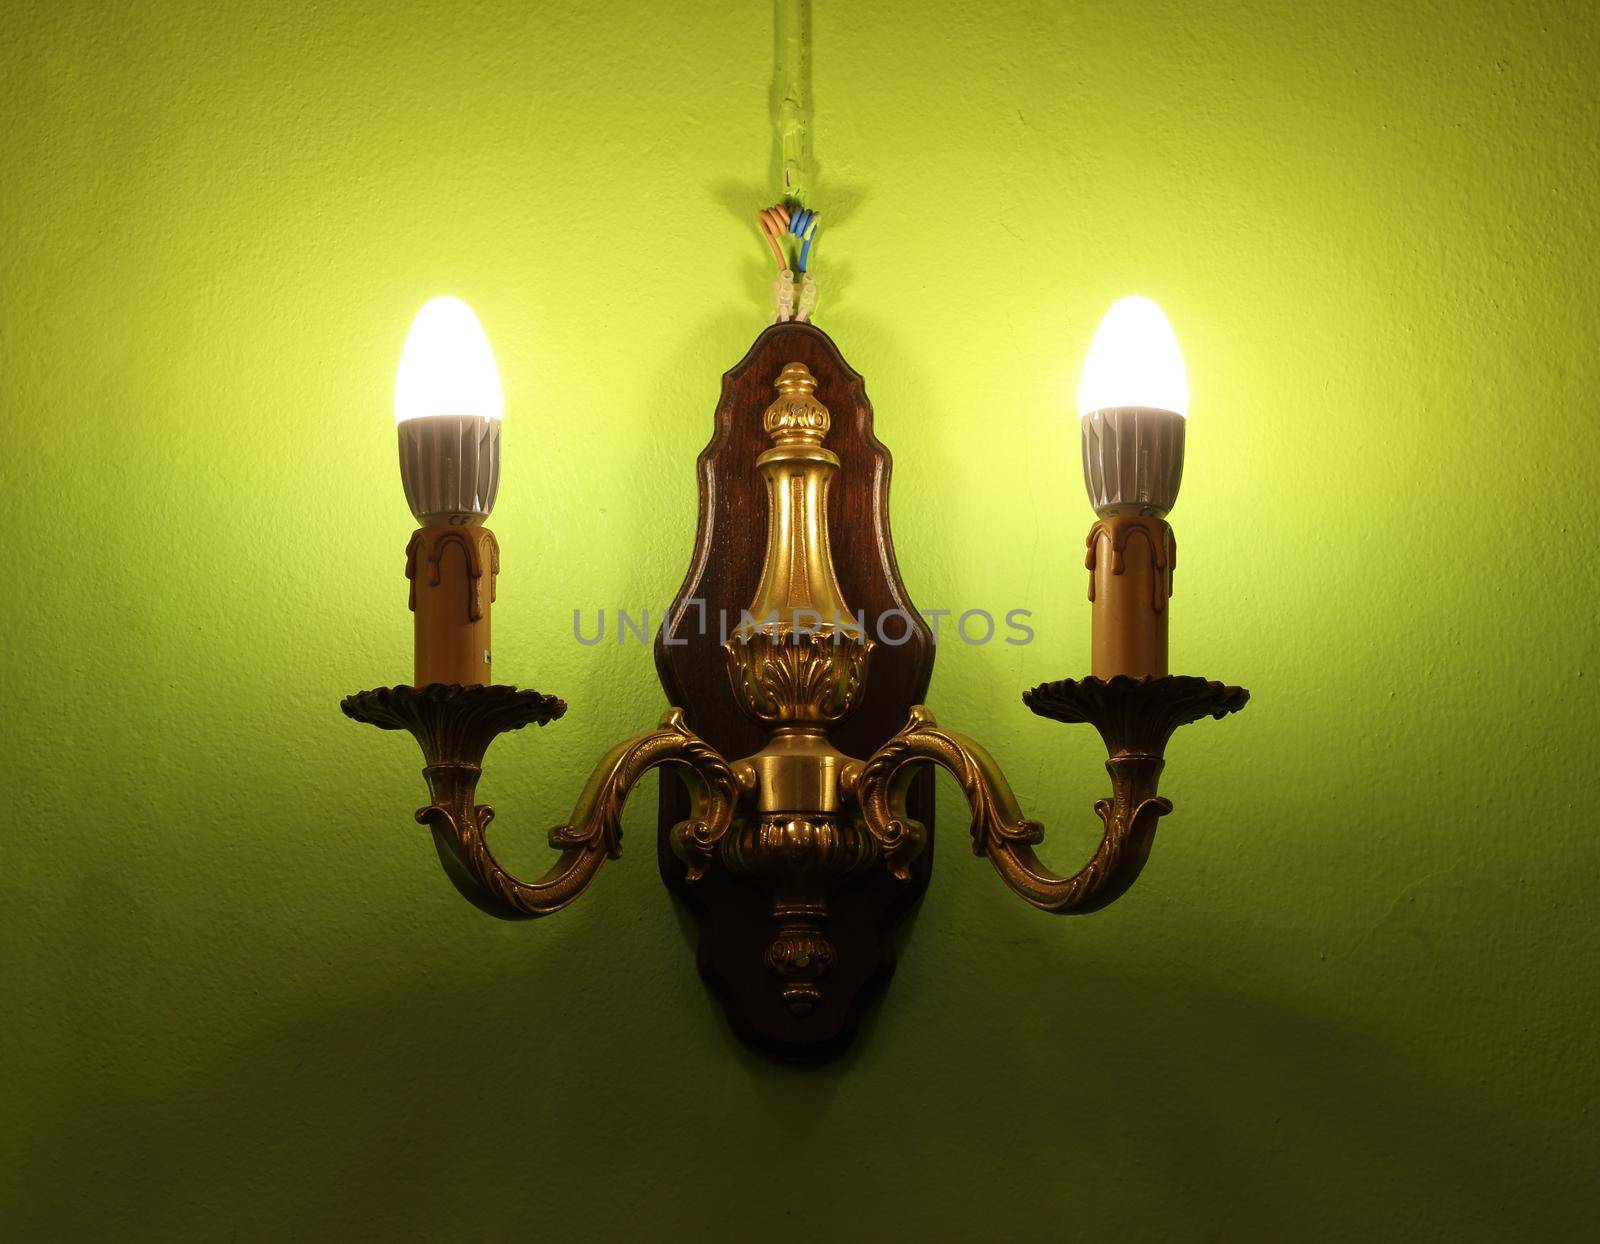 Lighted classic lamp on the green wall